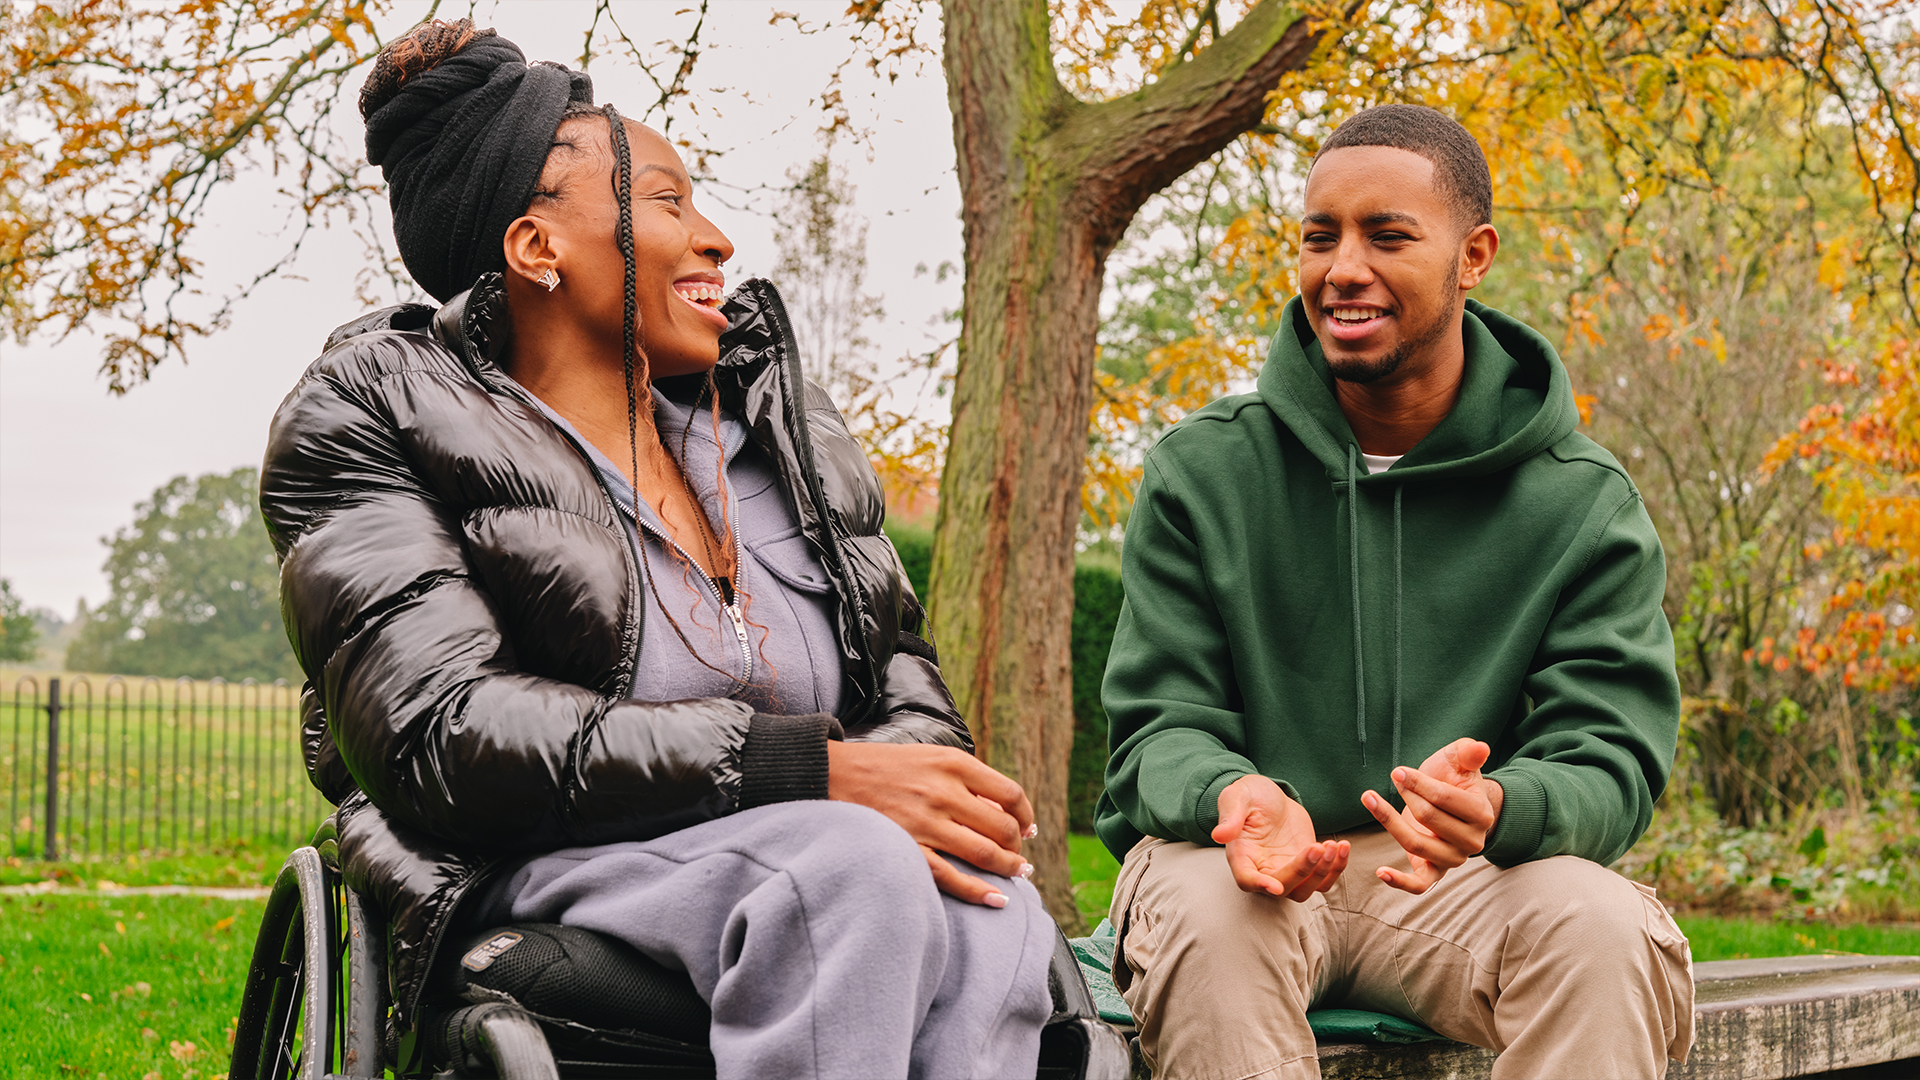 A girl in a wheelchair smiling and chatting to a boy sitting on a bench in the park.